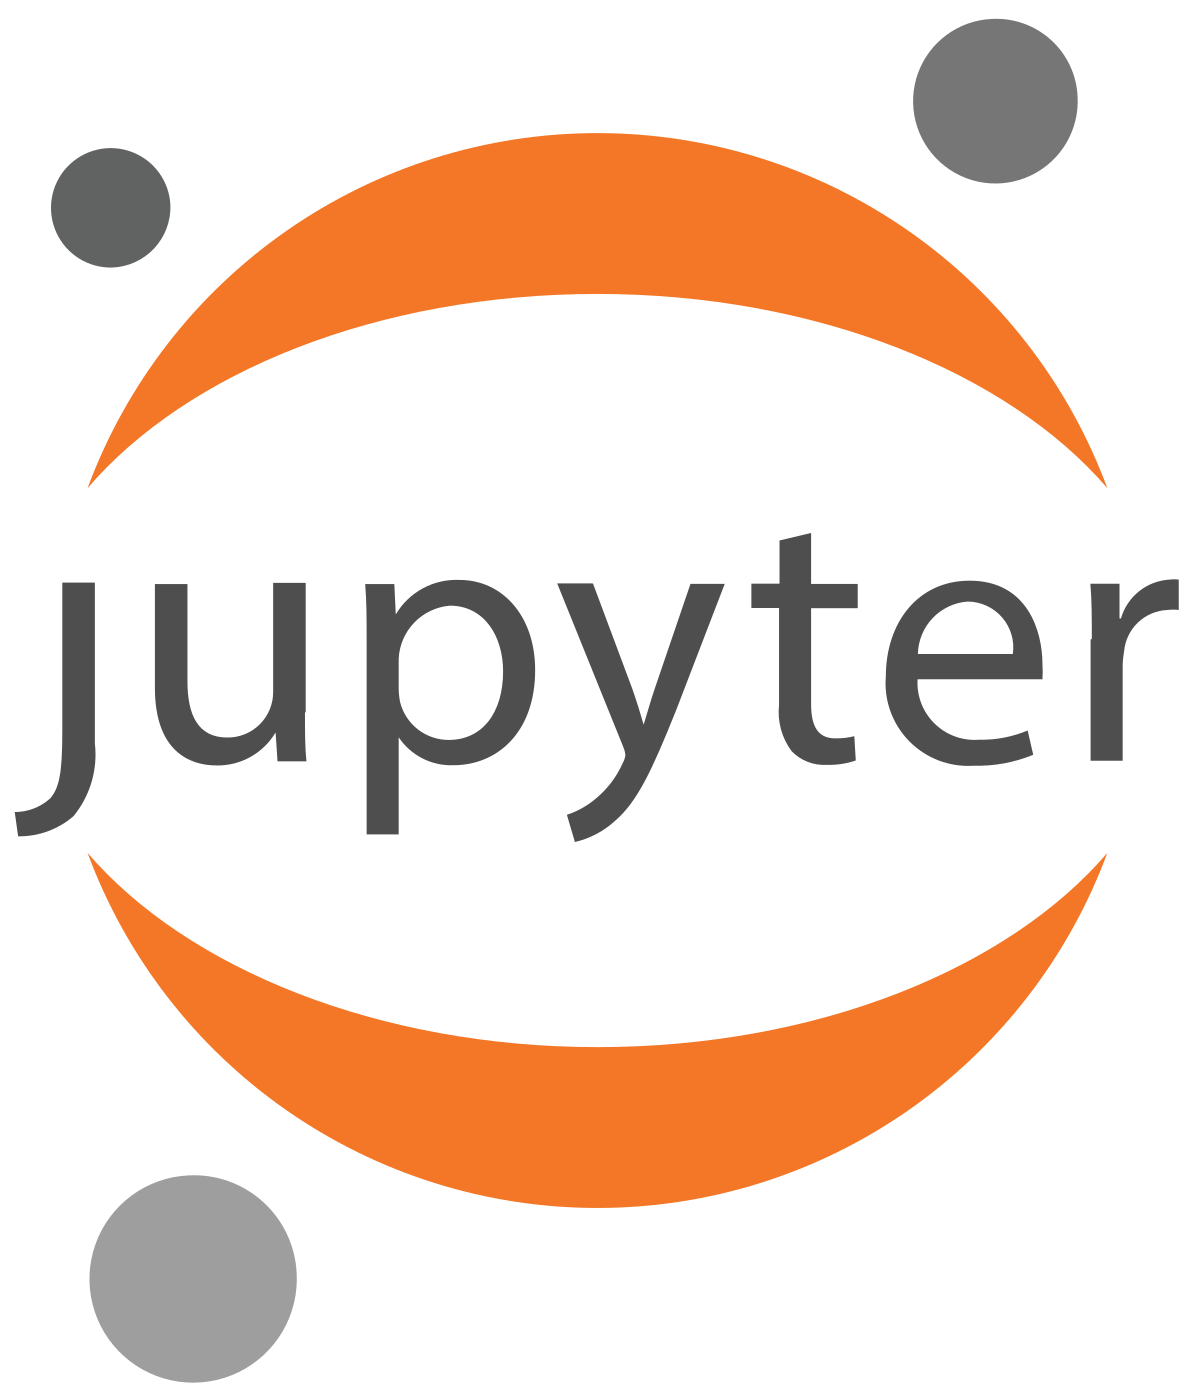 Compatible with JupyterLab 4.0.0 and higher and is currently in Beta